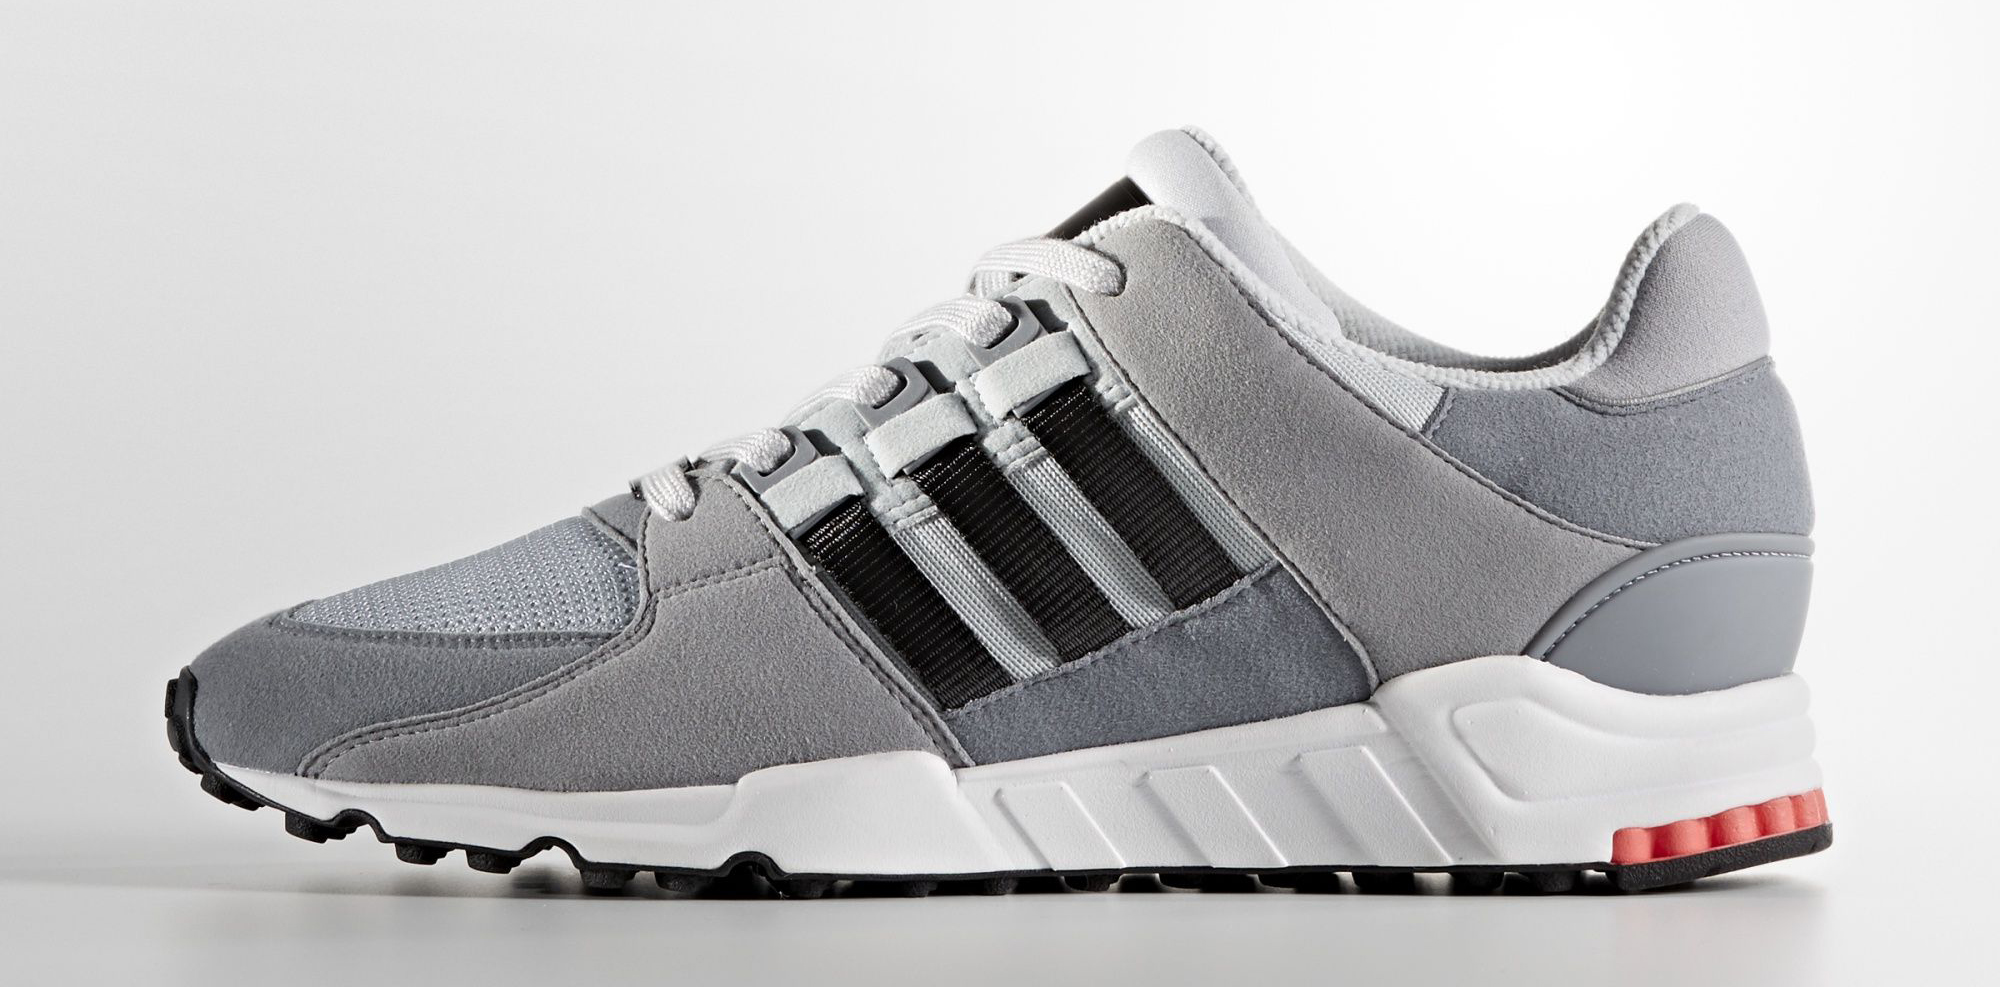 adidas-eqt-support-rf-grey-turbo-red-1